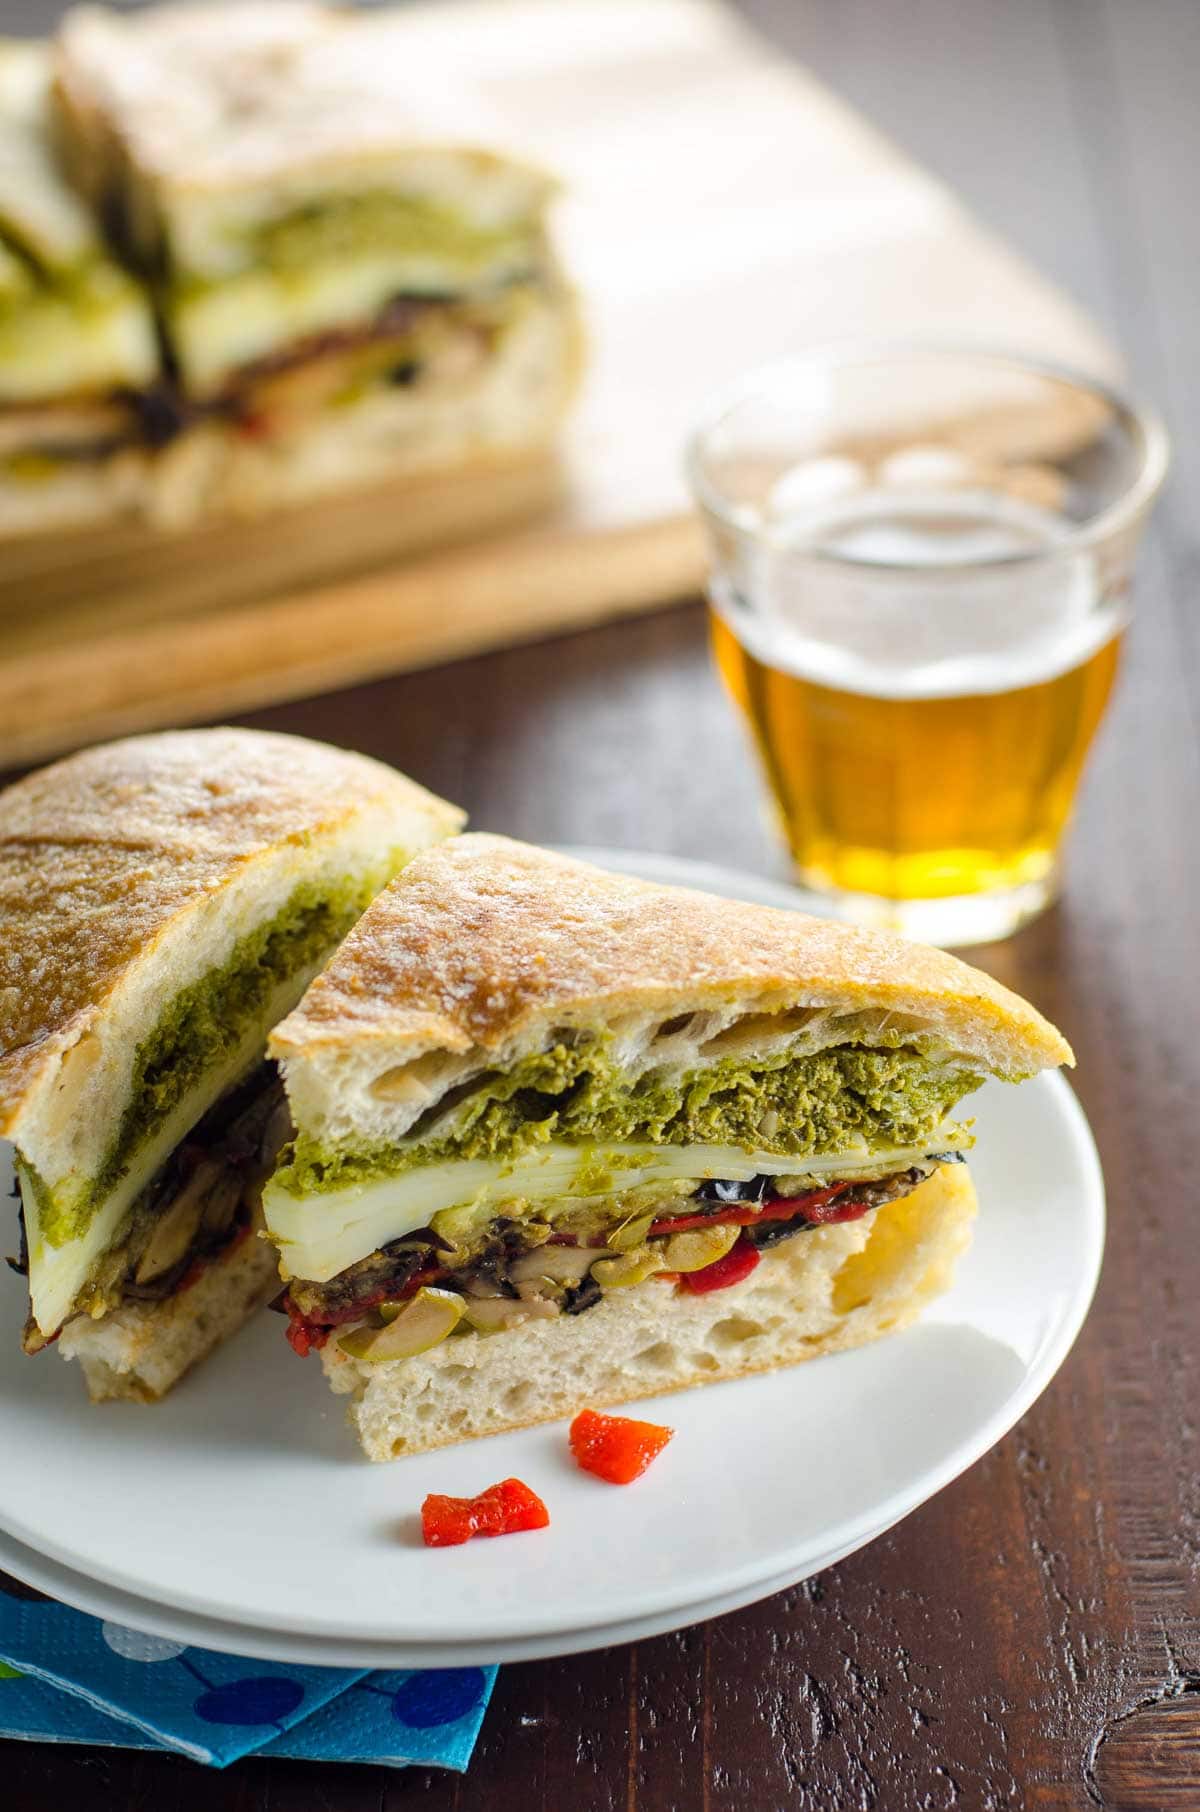 slices of vegetarian muffaletta on a plate and a glass of beer